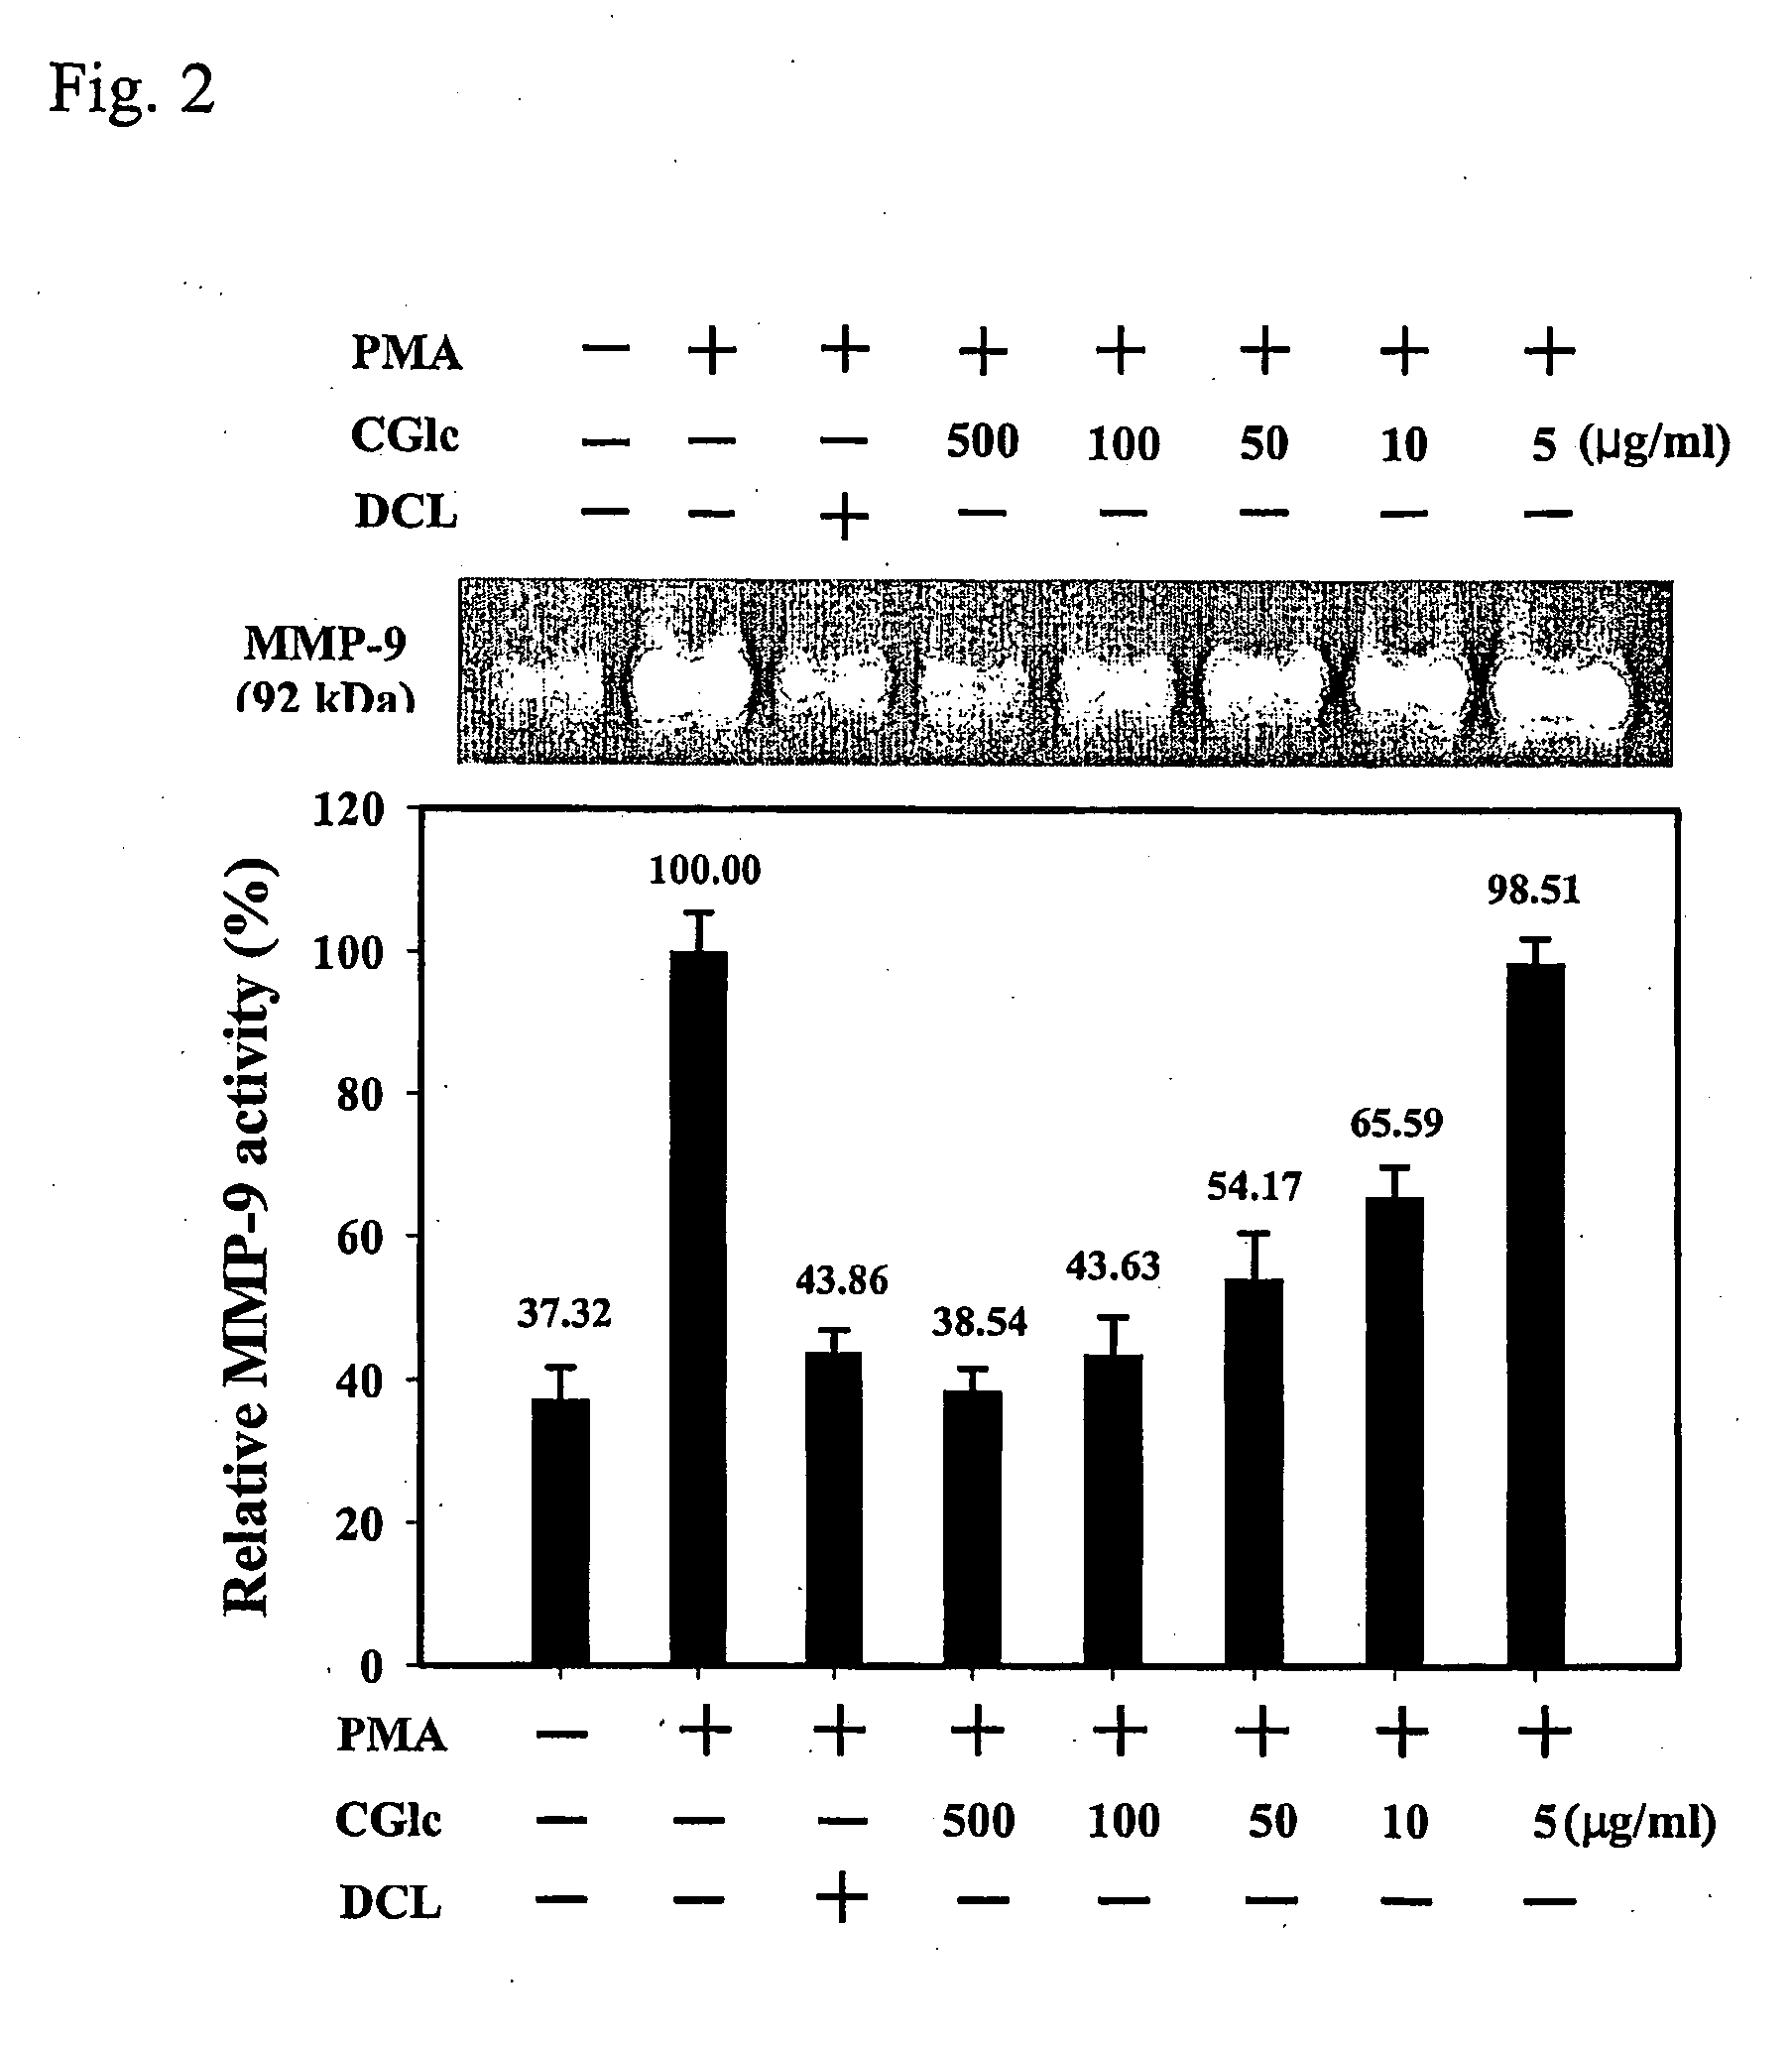 Carboxylated glucosamine compounds for inhibiting the activation and expression of matrix metalloproteinase-9 in human fibrosarcoma cells and matrix metalloproteinase-9 inhibitors containing the same